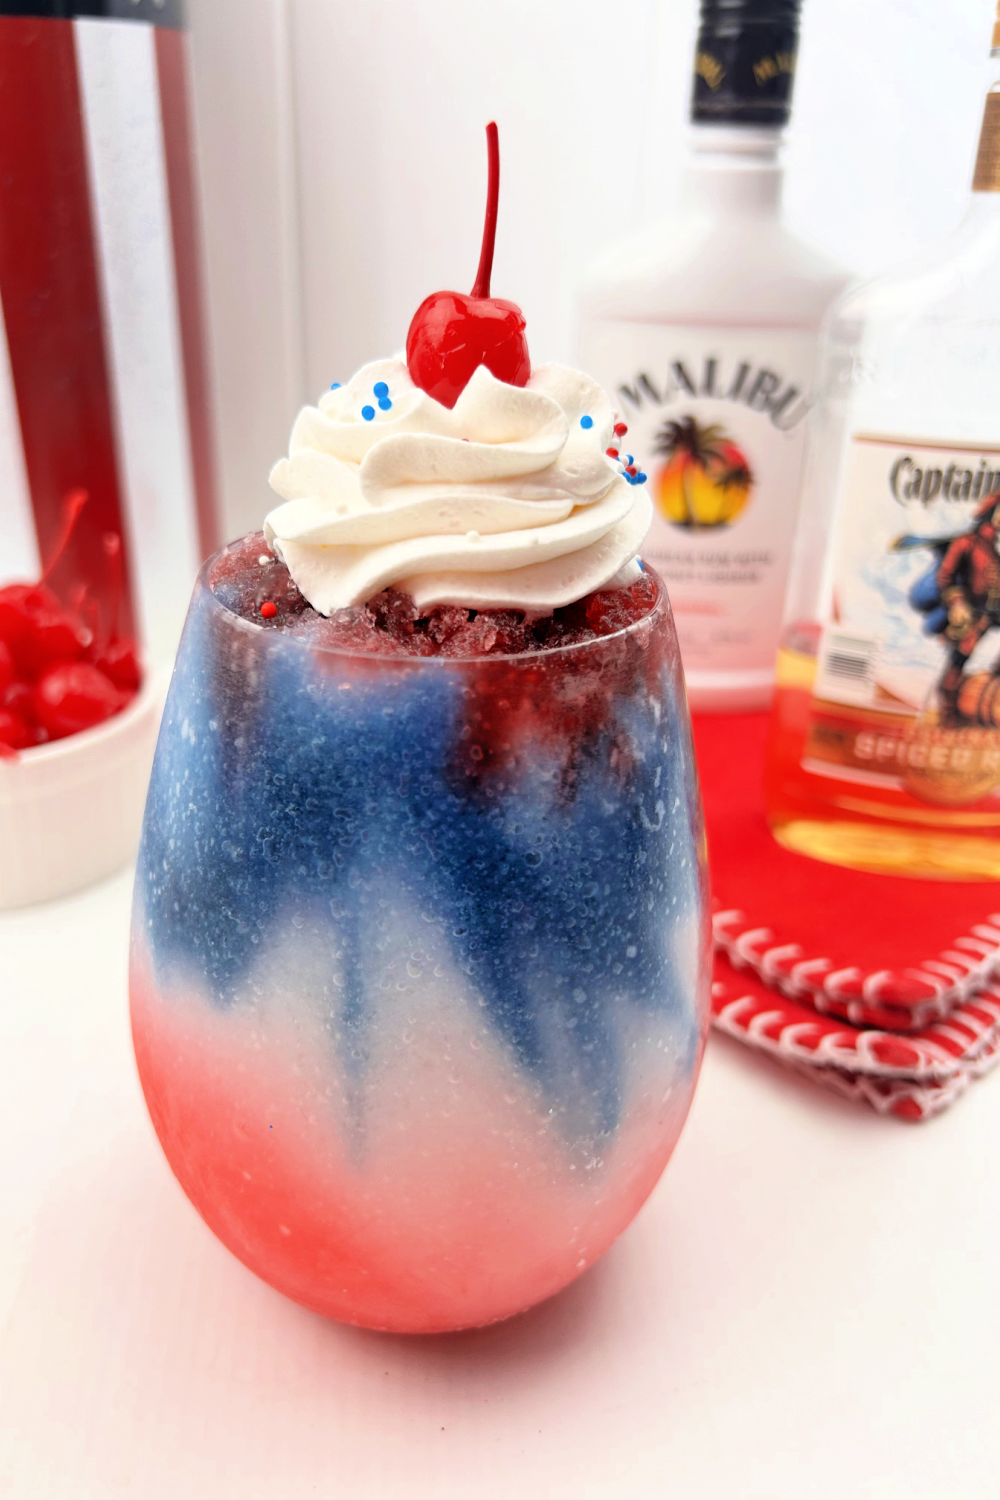 Featuring festive, patriotic colors, this Red White, And Blue Cocktail is like frozen slushy with red on the bottom and blue on the top layer with whipped cream and a cherry on top. Added are patriotic sprinkles. Bottle of the alcohol are in the background.